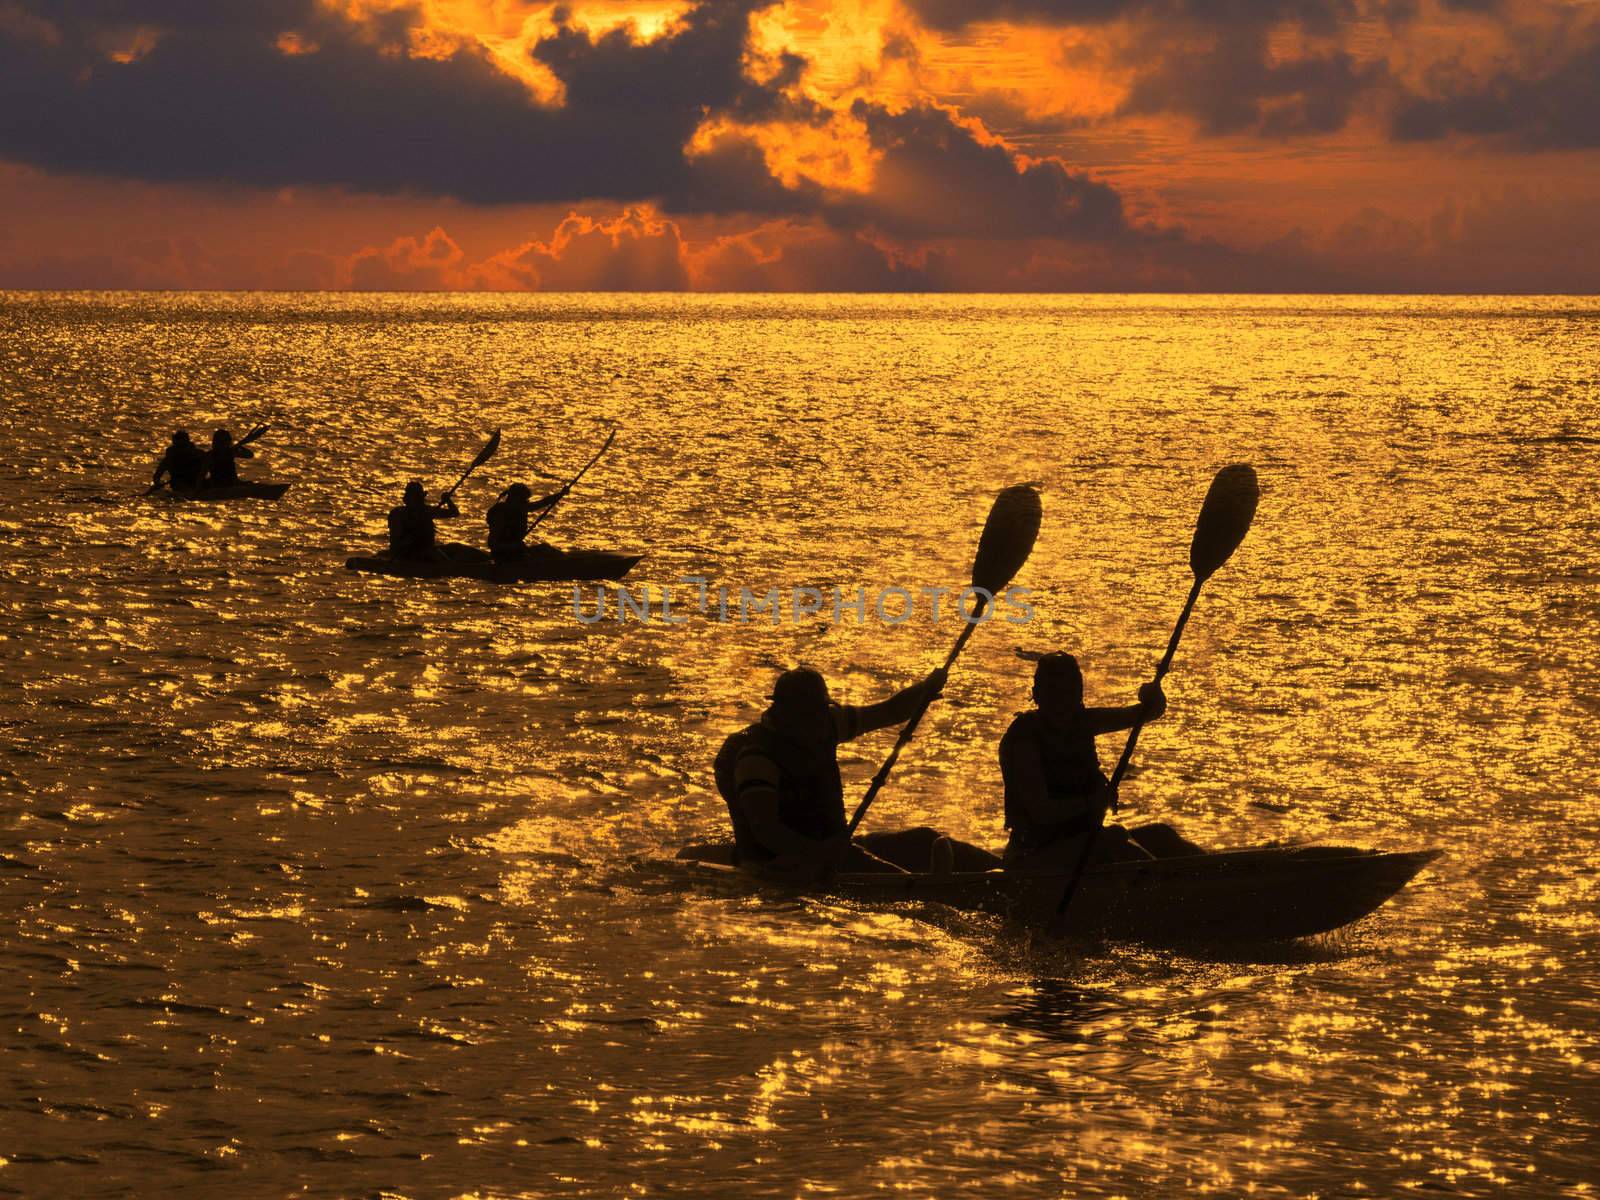 Kayakers rowing into the sunset